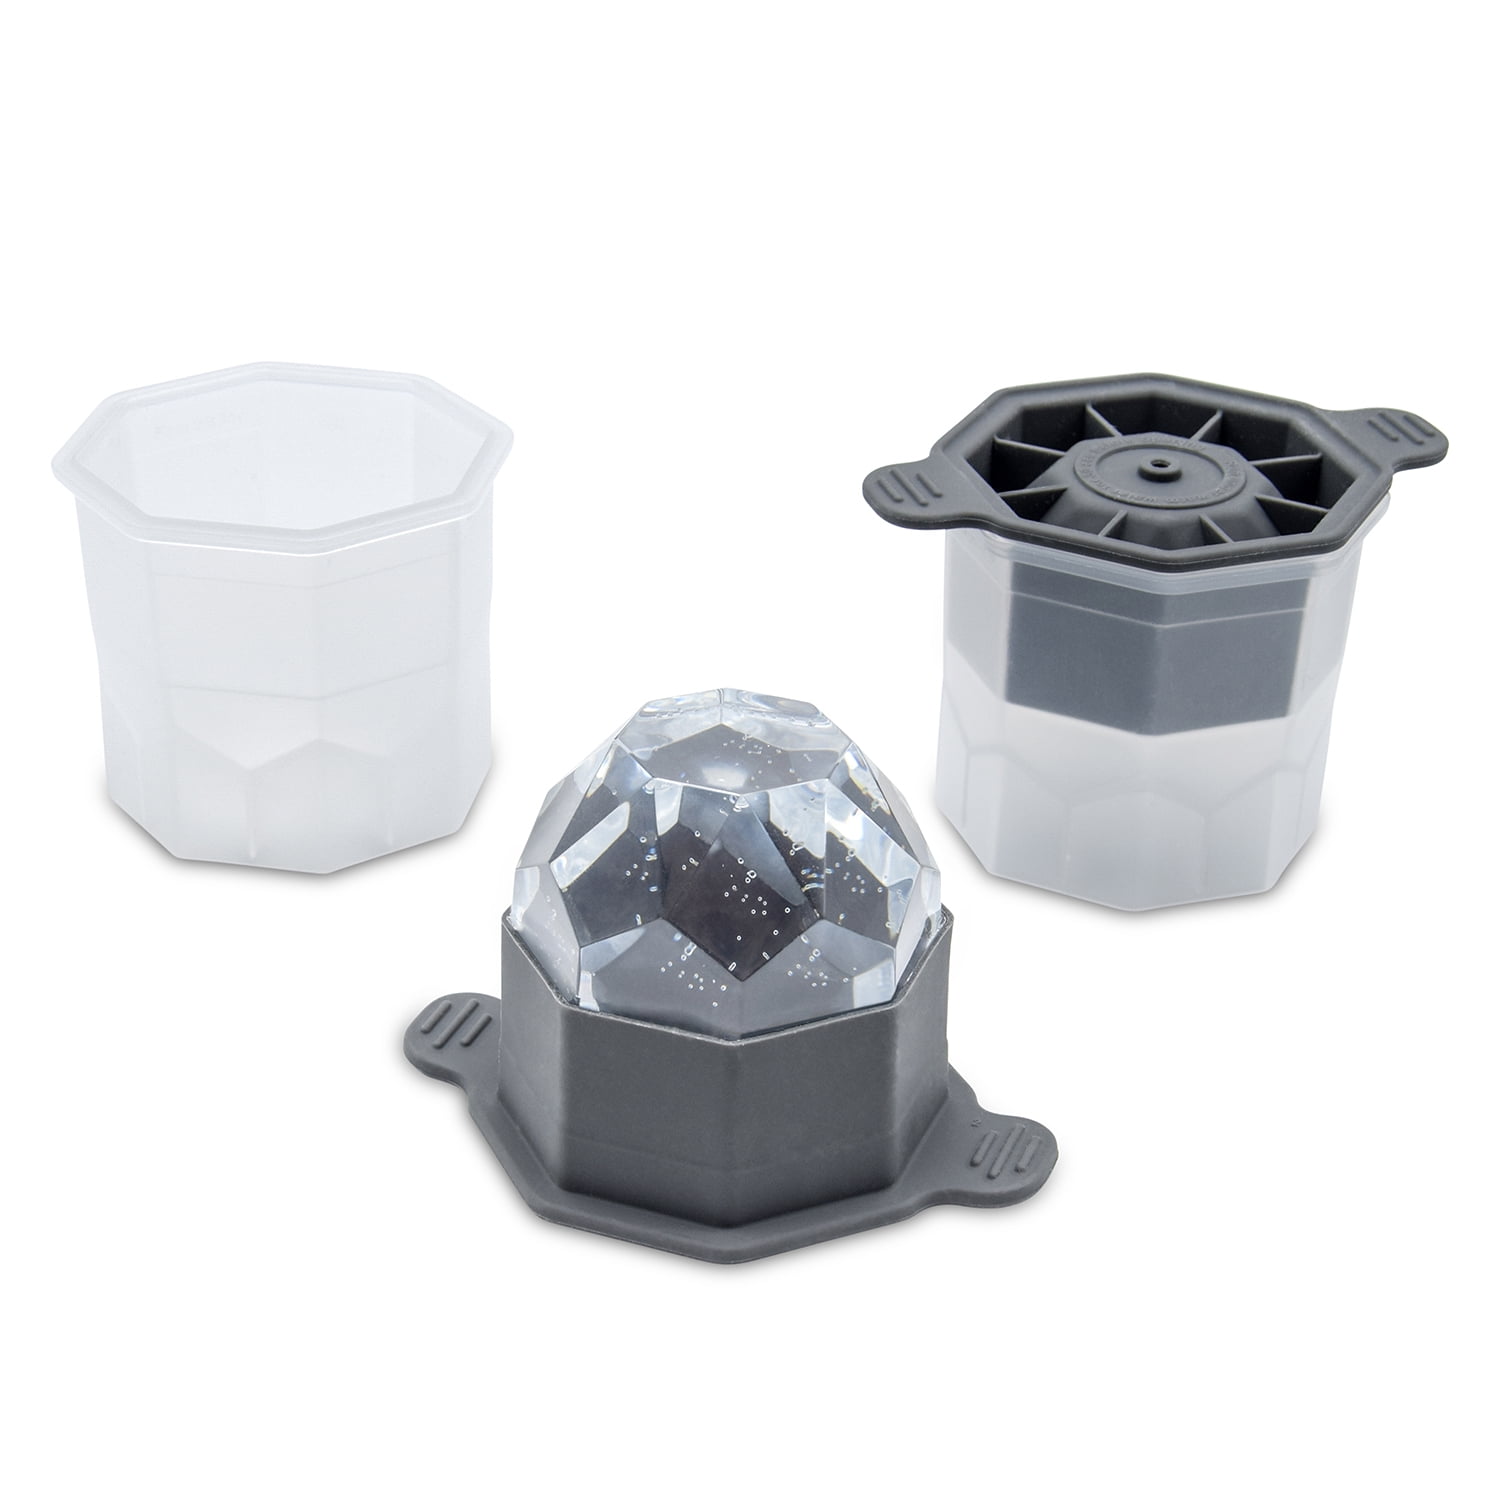 Ice Molds Double Rocks Set Of 2 at Whole Foods Market